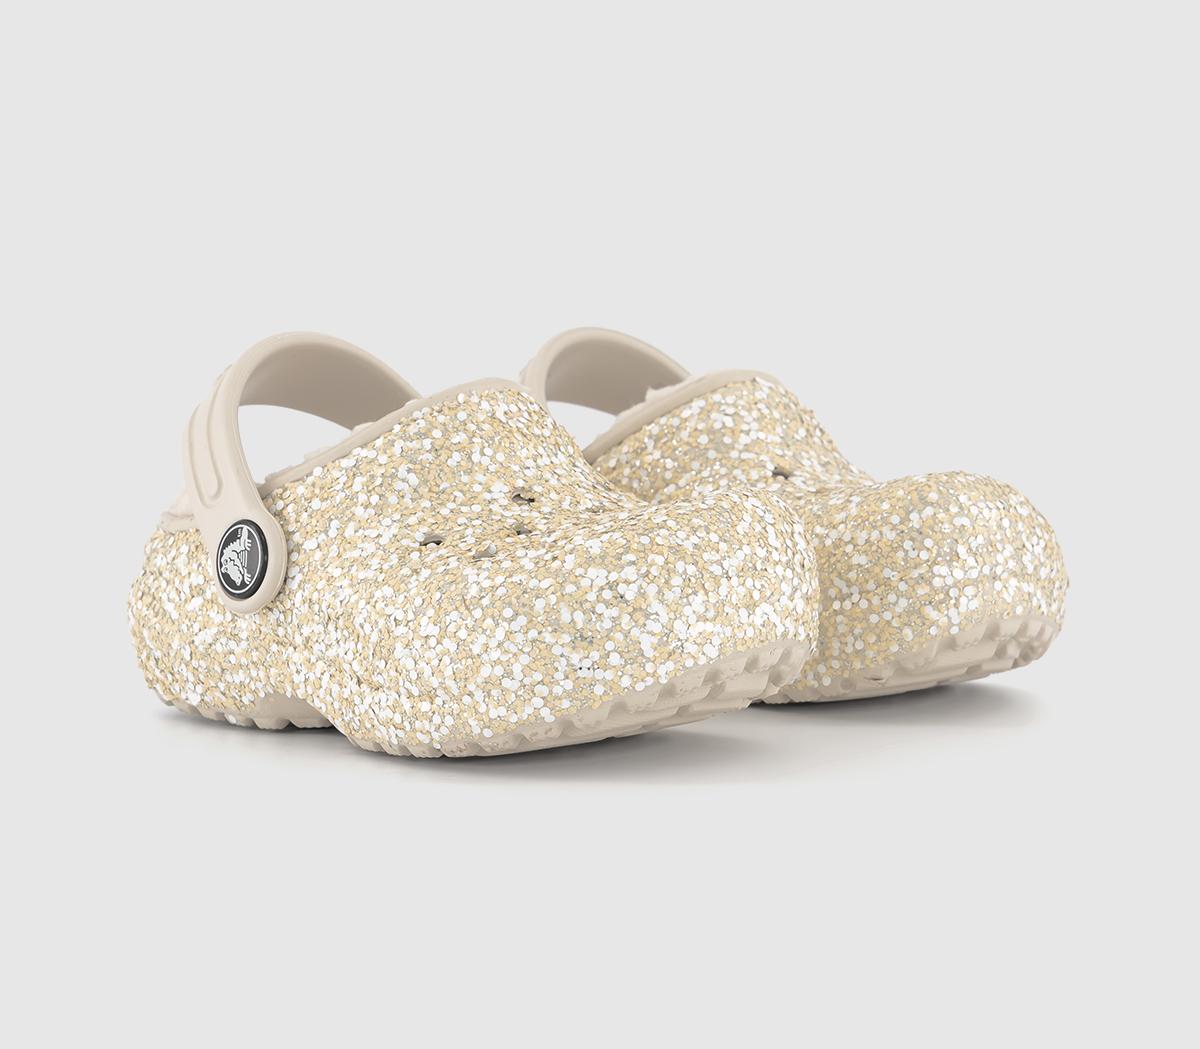 Crocs Kids Classic Lined Toddler Clogs Stucco Glitter Natural, 7infant